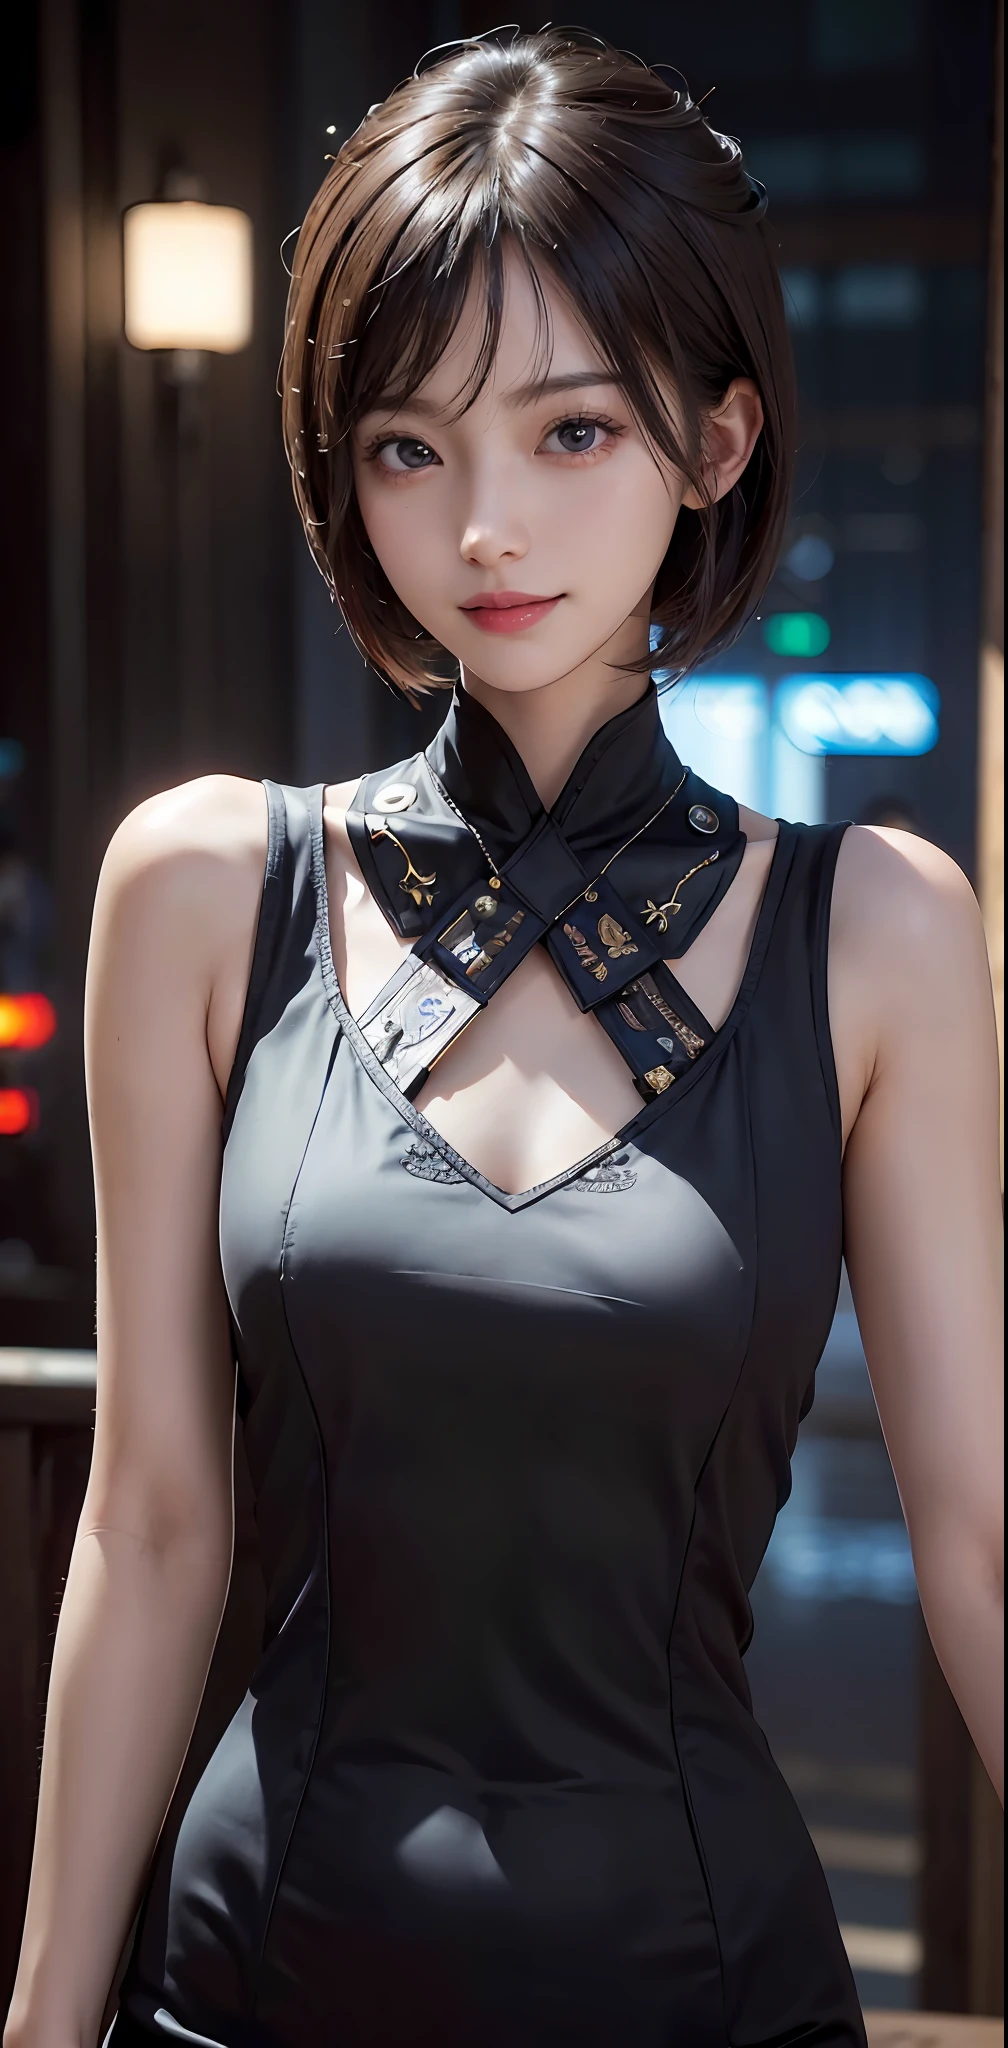 Masterpiece, 1 Beautiful Girl, Detailed Eyes, Swollen Eyes, Best Quality, Ultra High Resolution, (Reality: 1.4), Original Photo, 1Girl, Cinematic Lighting, Smiling, Japanese, Asian Beauty, Korean, Clean, Super Beautiful, Beautiful Skin, Slender, Cyberpunk Background, (Ultra Realistic ), (high resolution), (8K), (very detailed), (best illustration), (beautifully detailed eyes), (super detailed), (wallpaper), (detailed face), viewer looking, fine details, detailed face, pureerosfaceace_v1, smiling, 46 point slanted bangs, looking straight ahead, neat clothes, dark colored eyes, sleeveless, body facing front, short hair, brown hair, divine messenger,